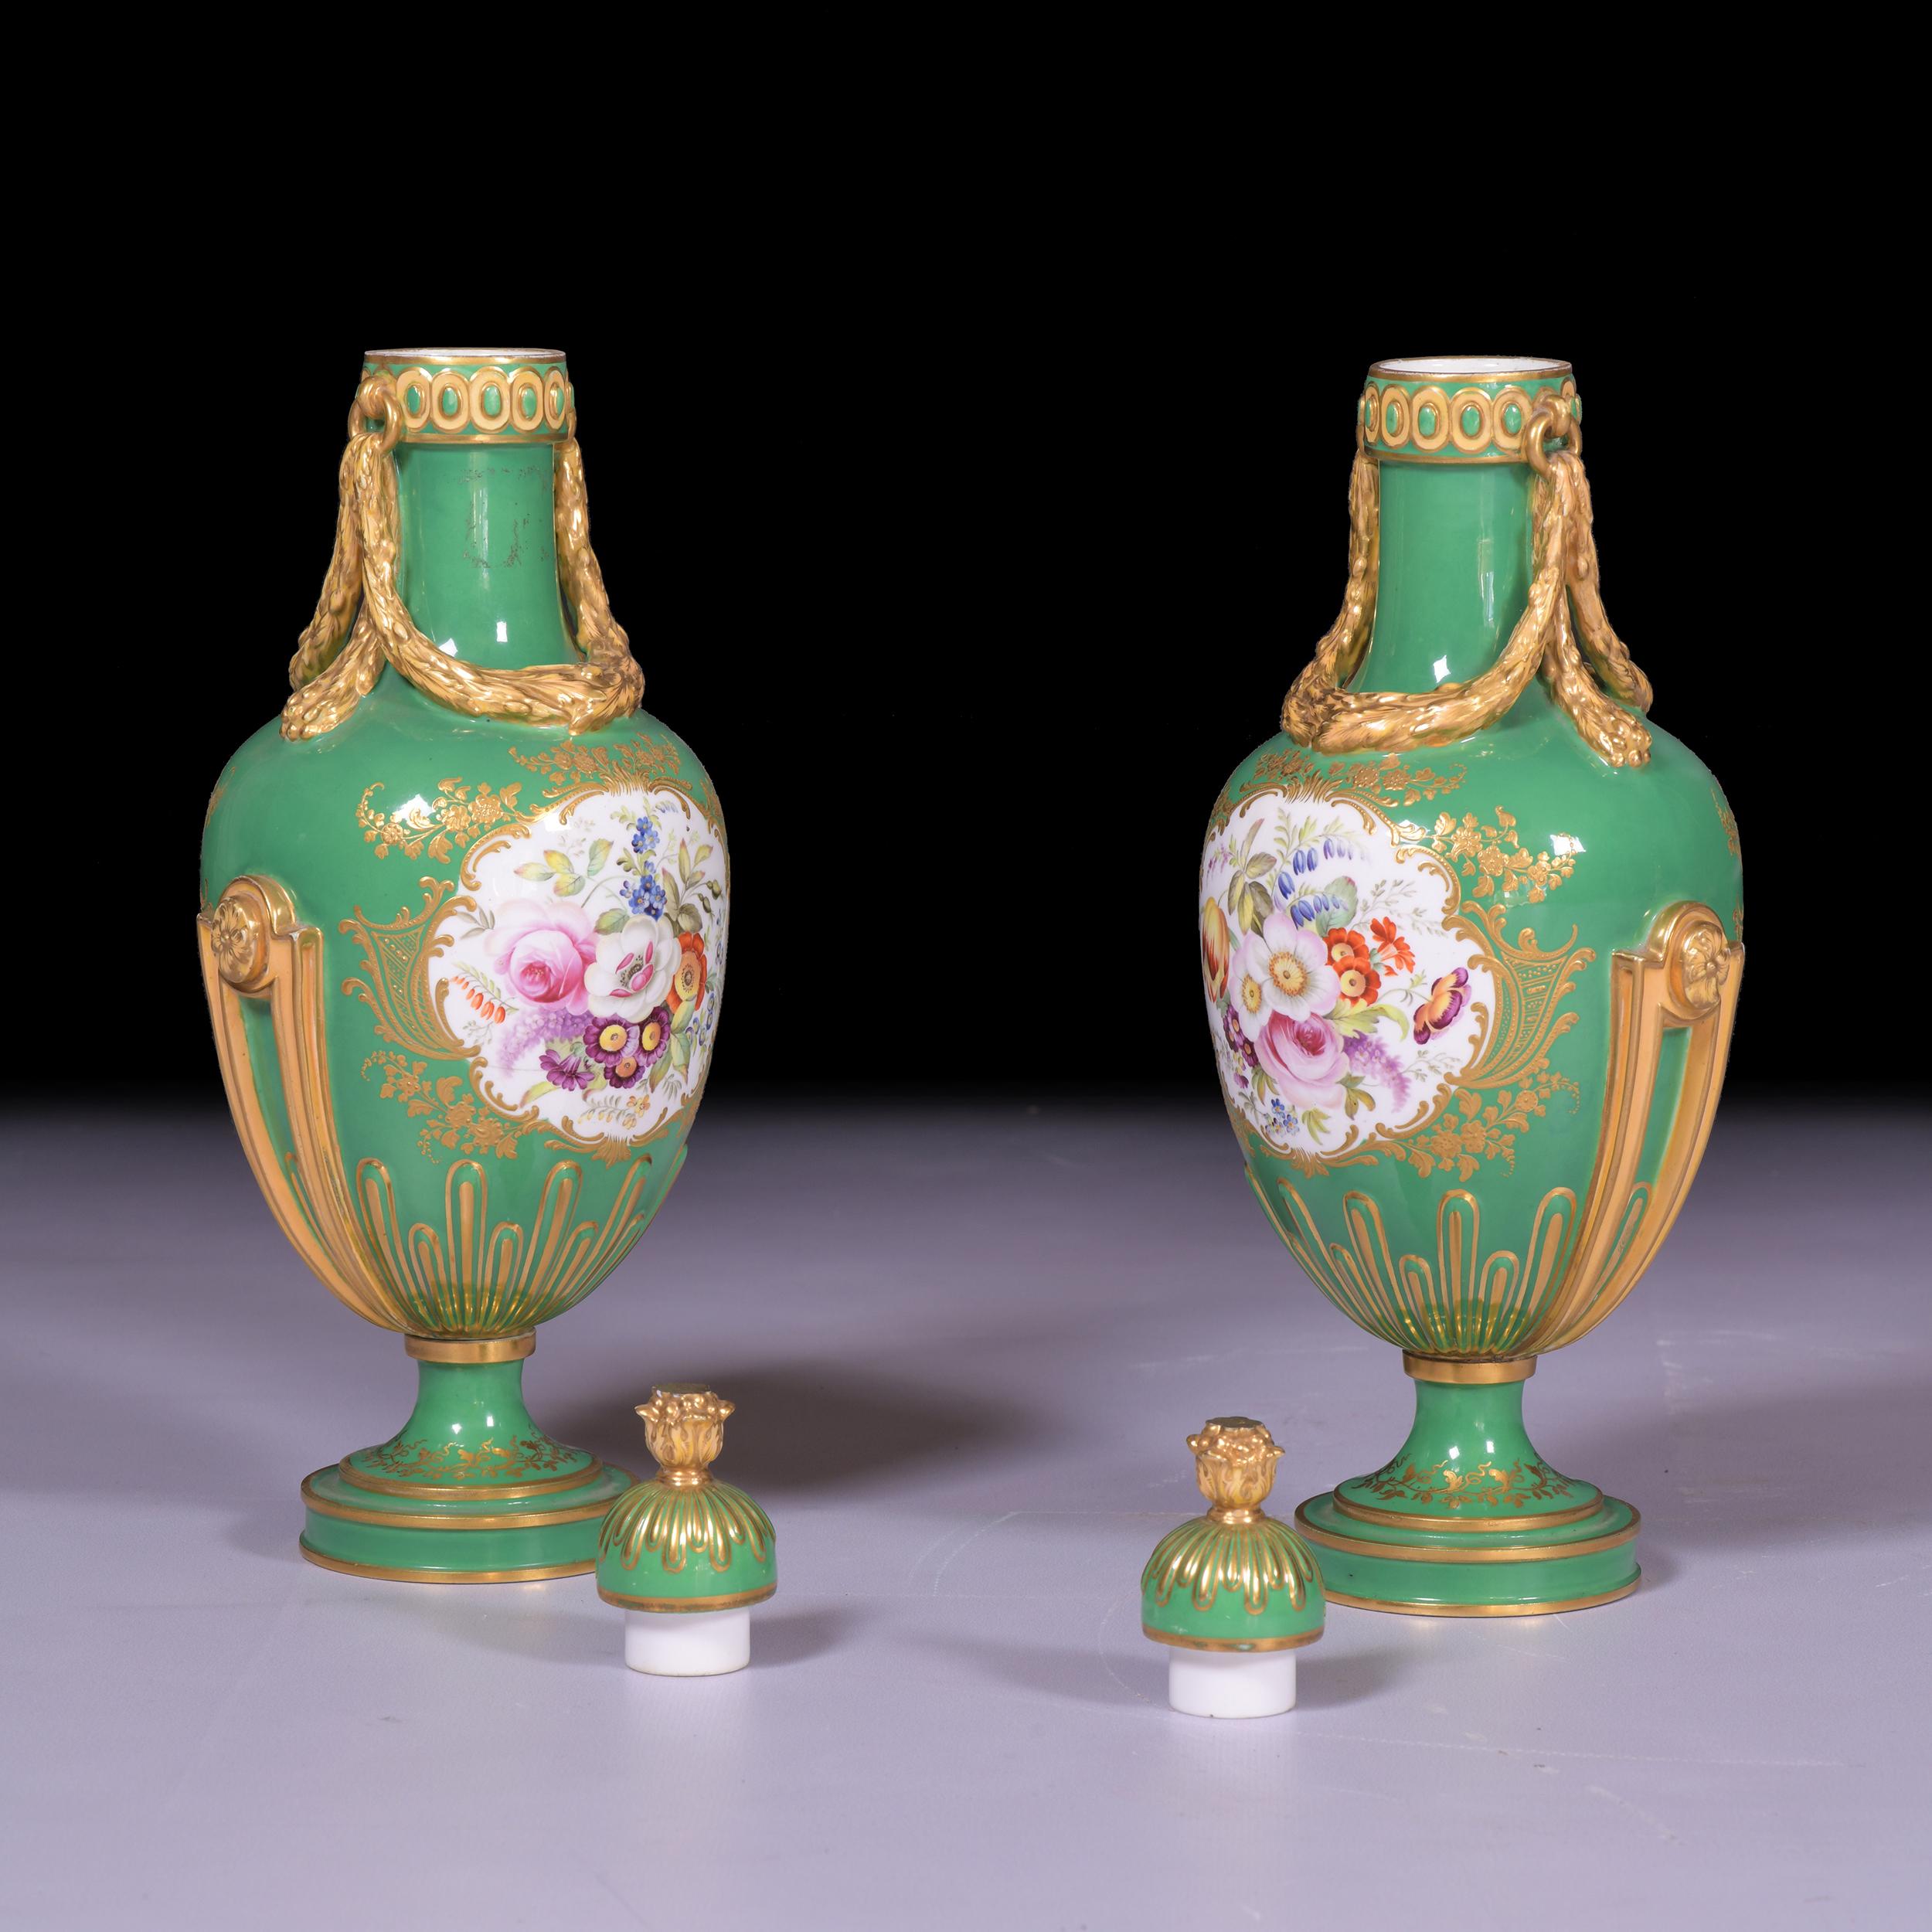 Victorian Pair Of 19th Century English Porcelain Vases & Covers By Coalport For Sale